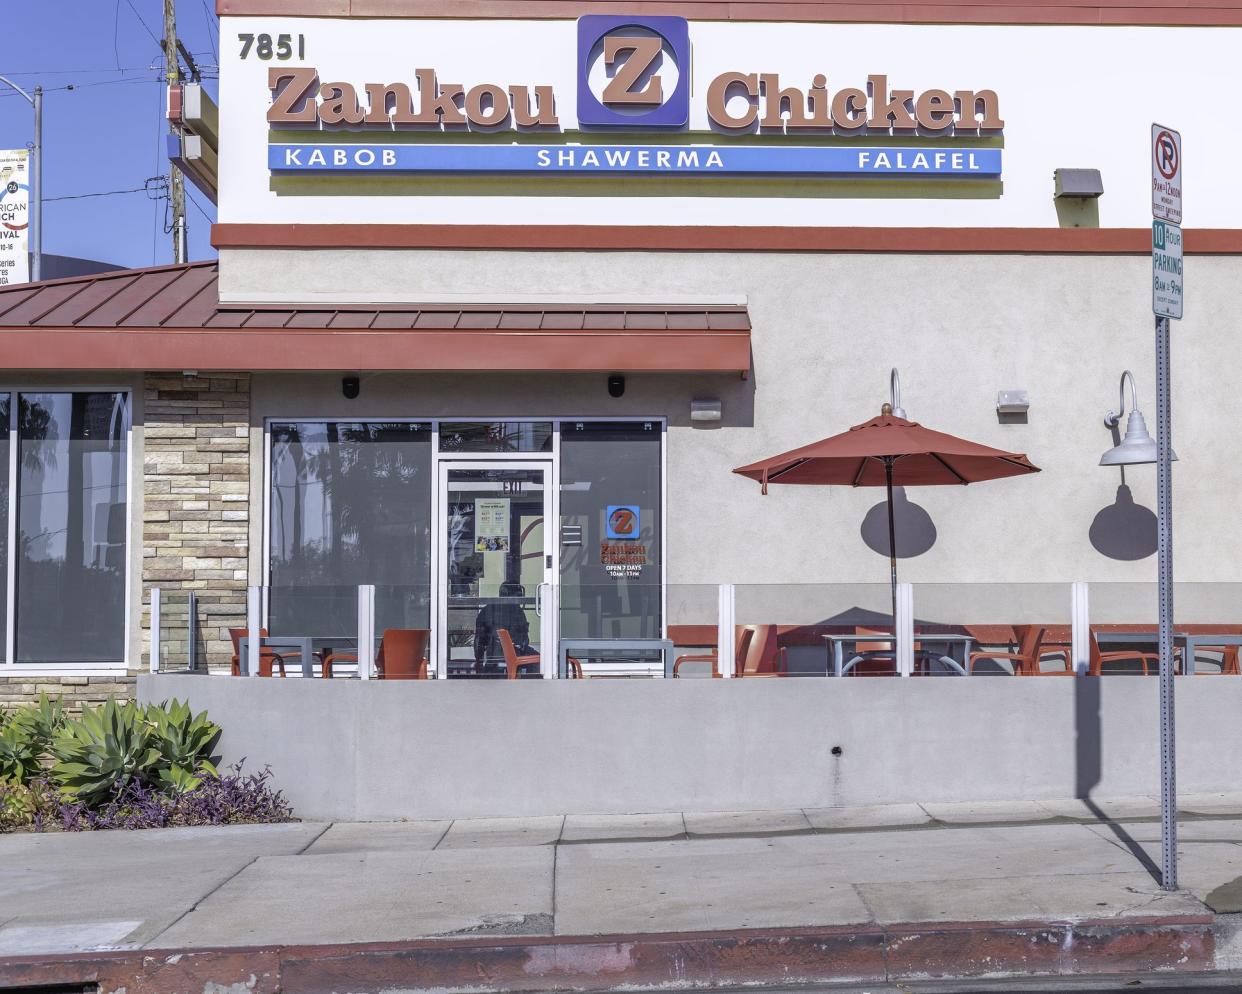 Los Angeles, CA, USA  August 17, 2022: Exterior of a Zankou Chicken restaurant on Sunset Boulevard in Los Angeles, CA.